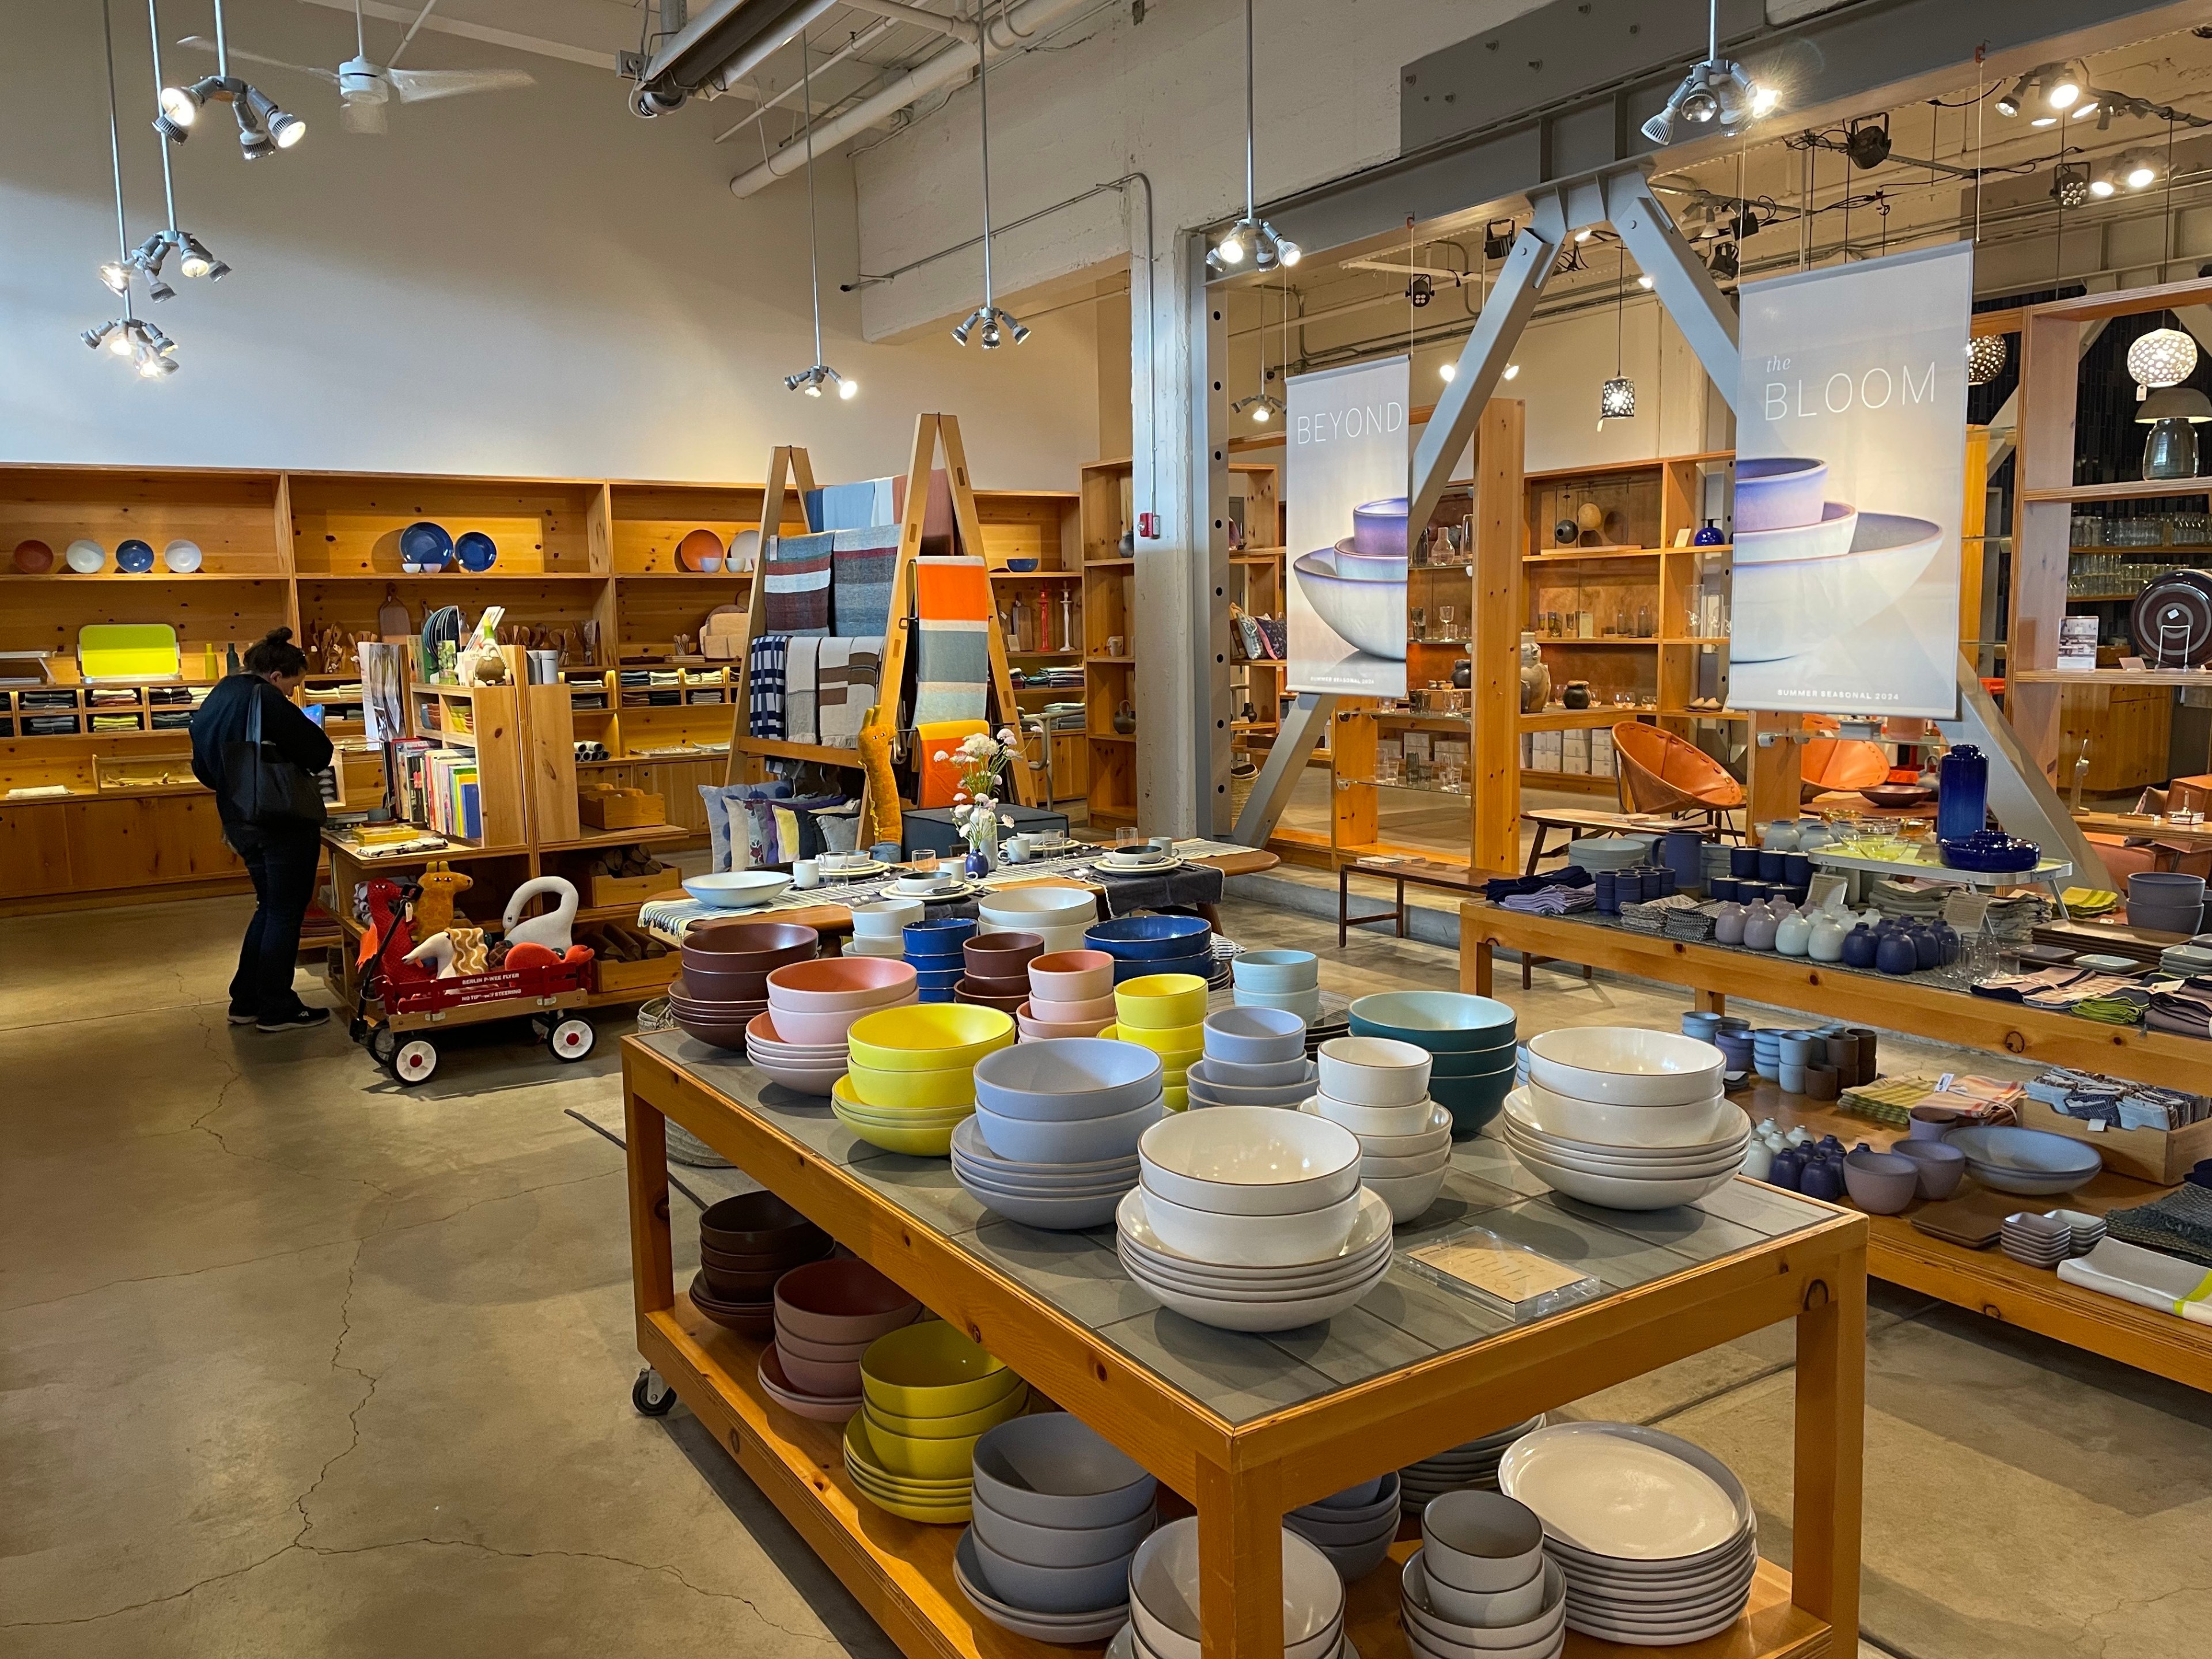 A ceramics showroom is seen in a photo.